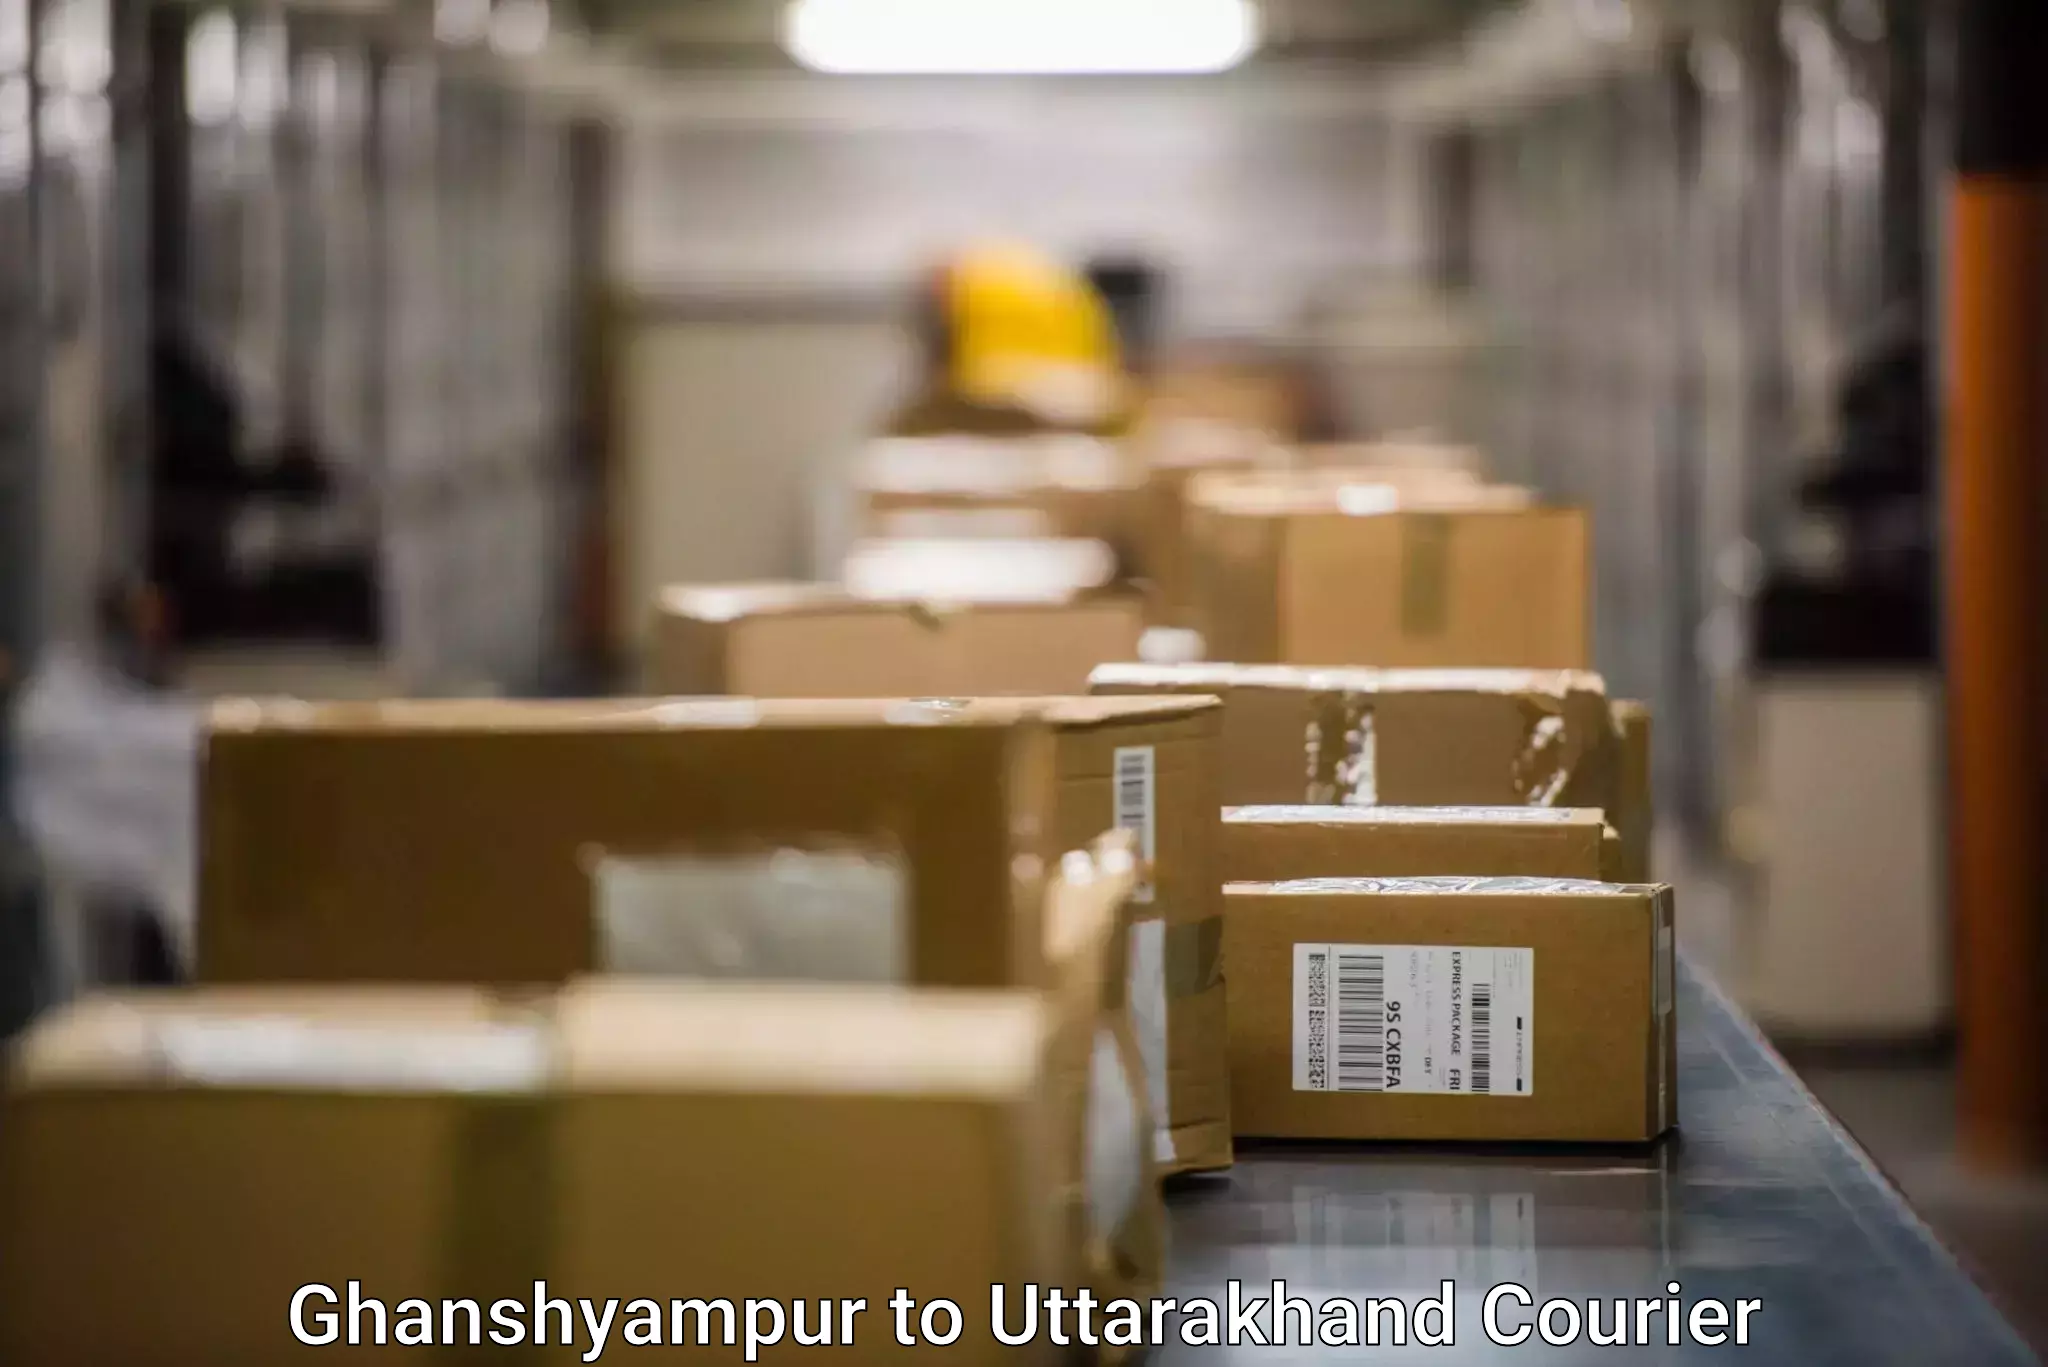 State-of-the-art courier technology Ghanshyampur to Gairsain